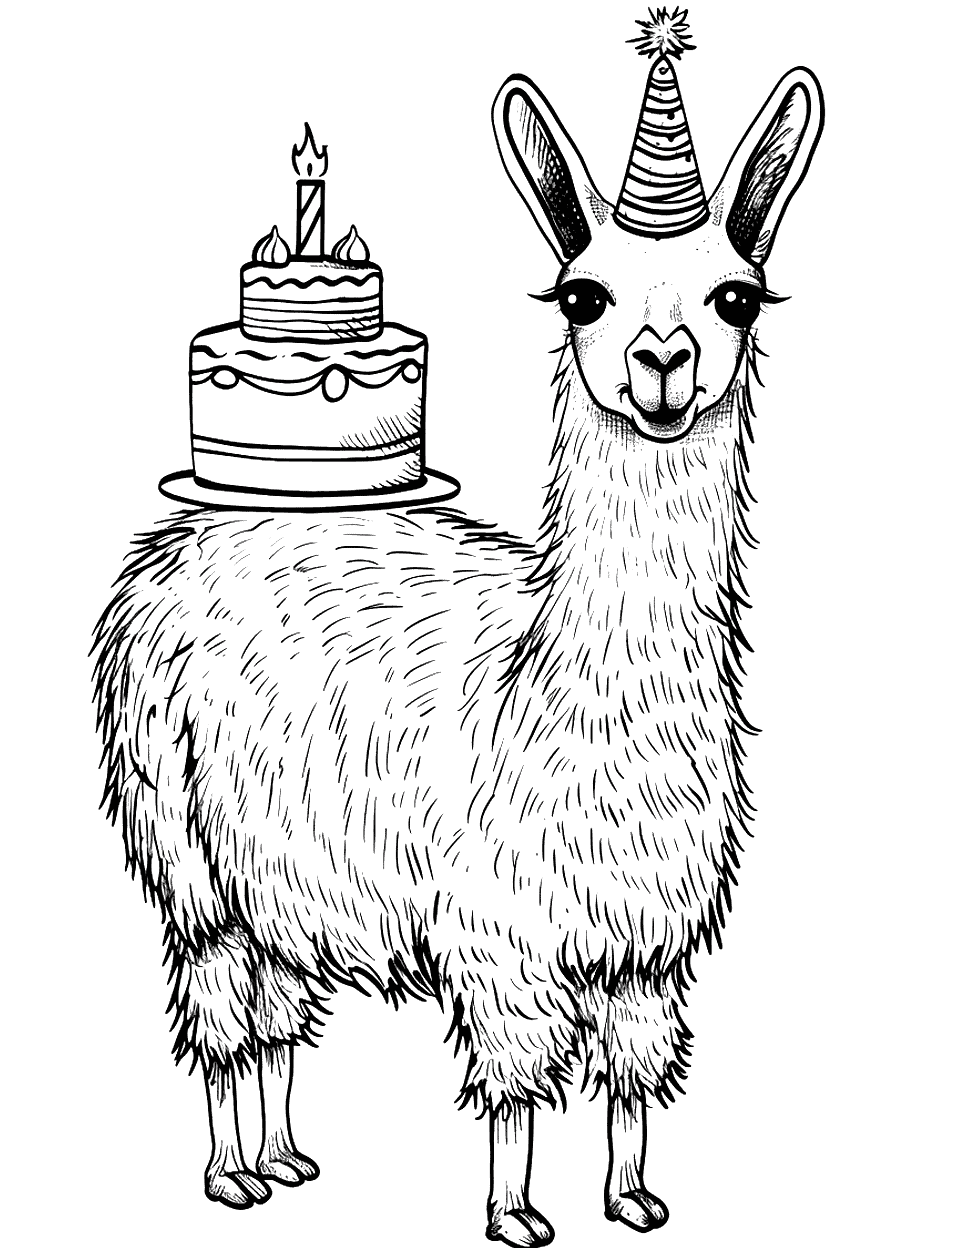 Llama with a Birthday Cake Coloring Page - A llama celebrating with a festive birthday cake.